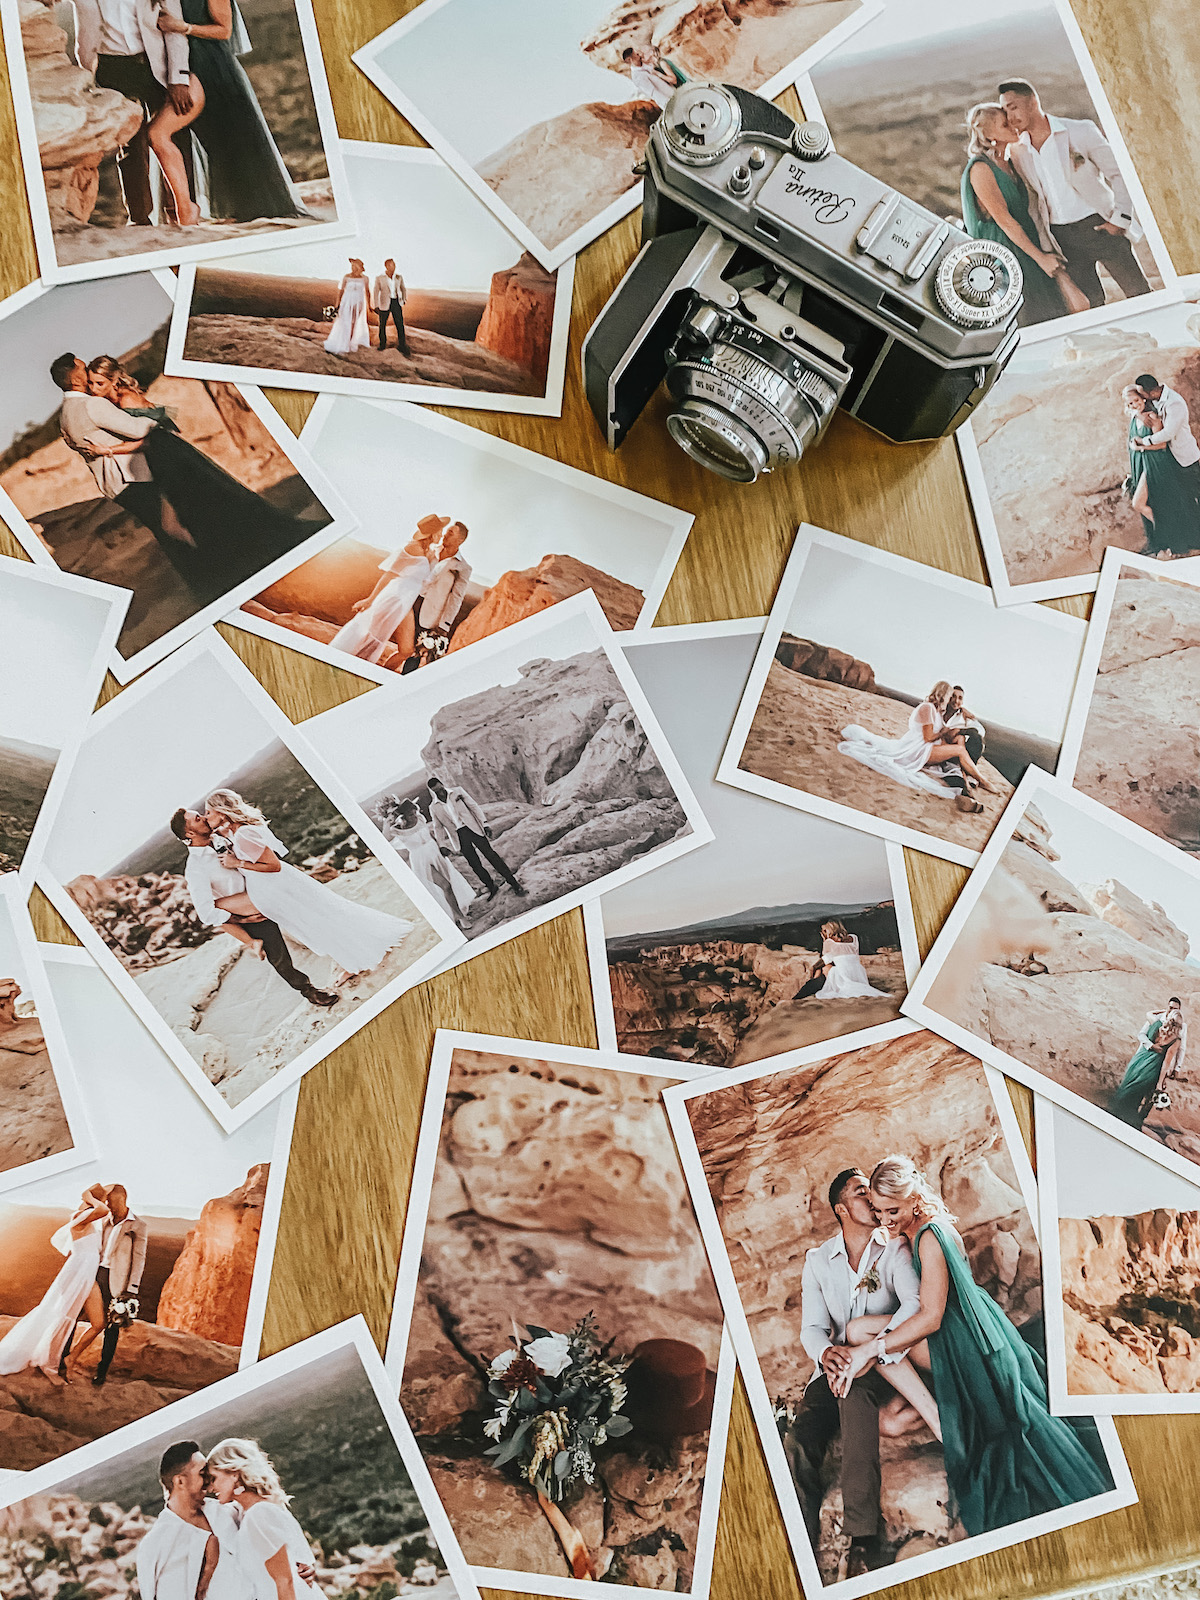 Photo prints of a man and woman spread out on table